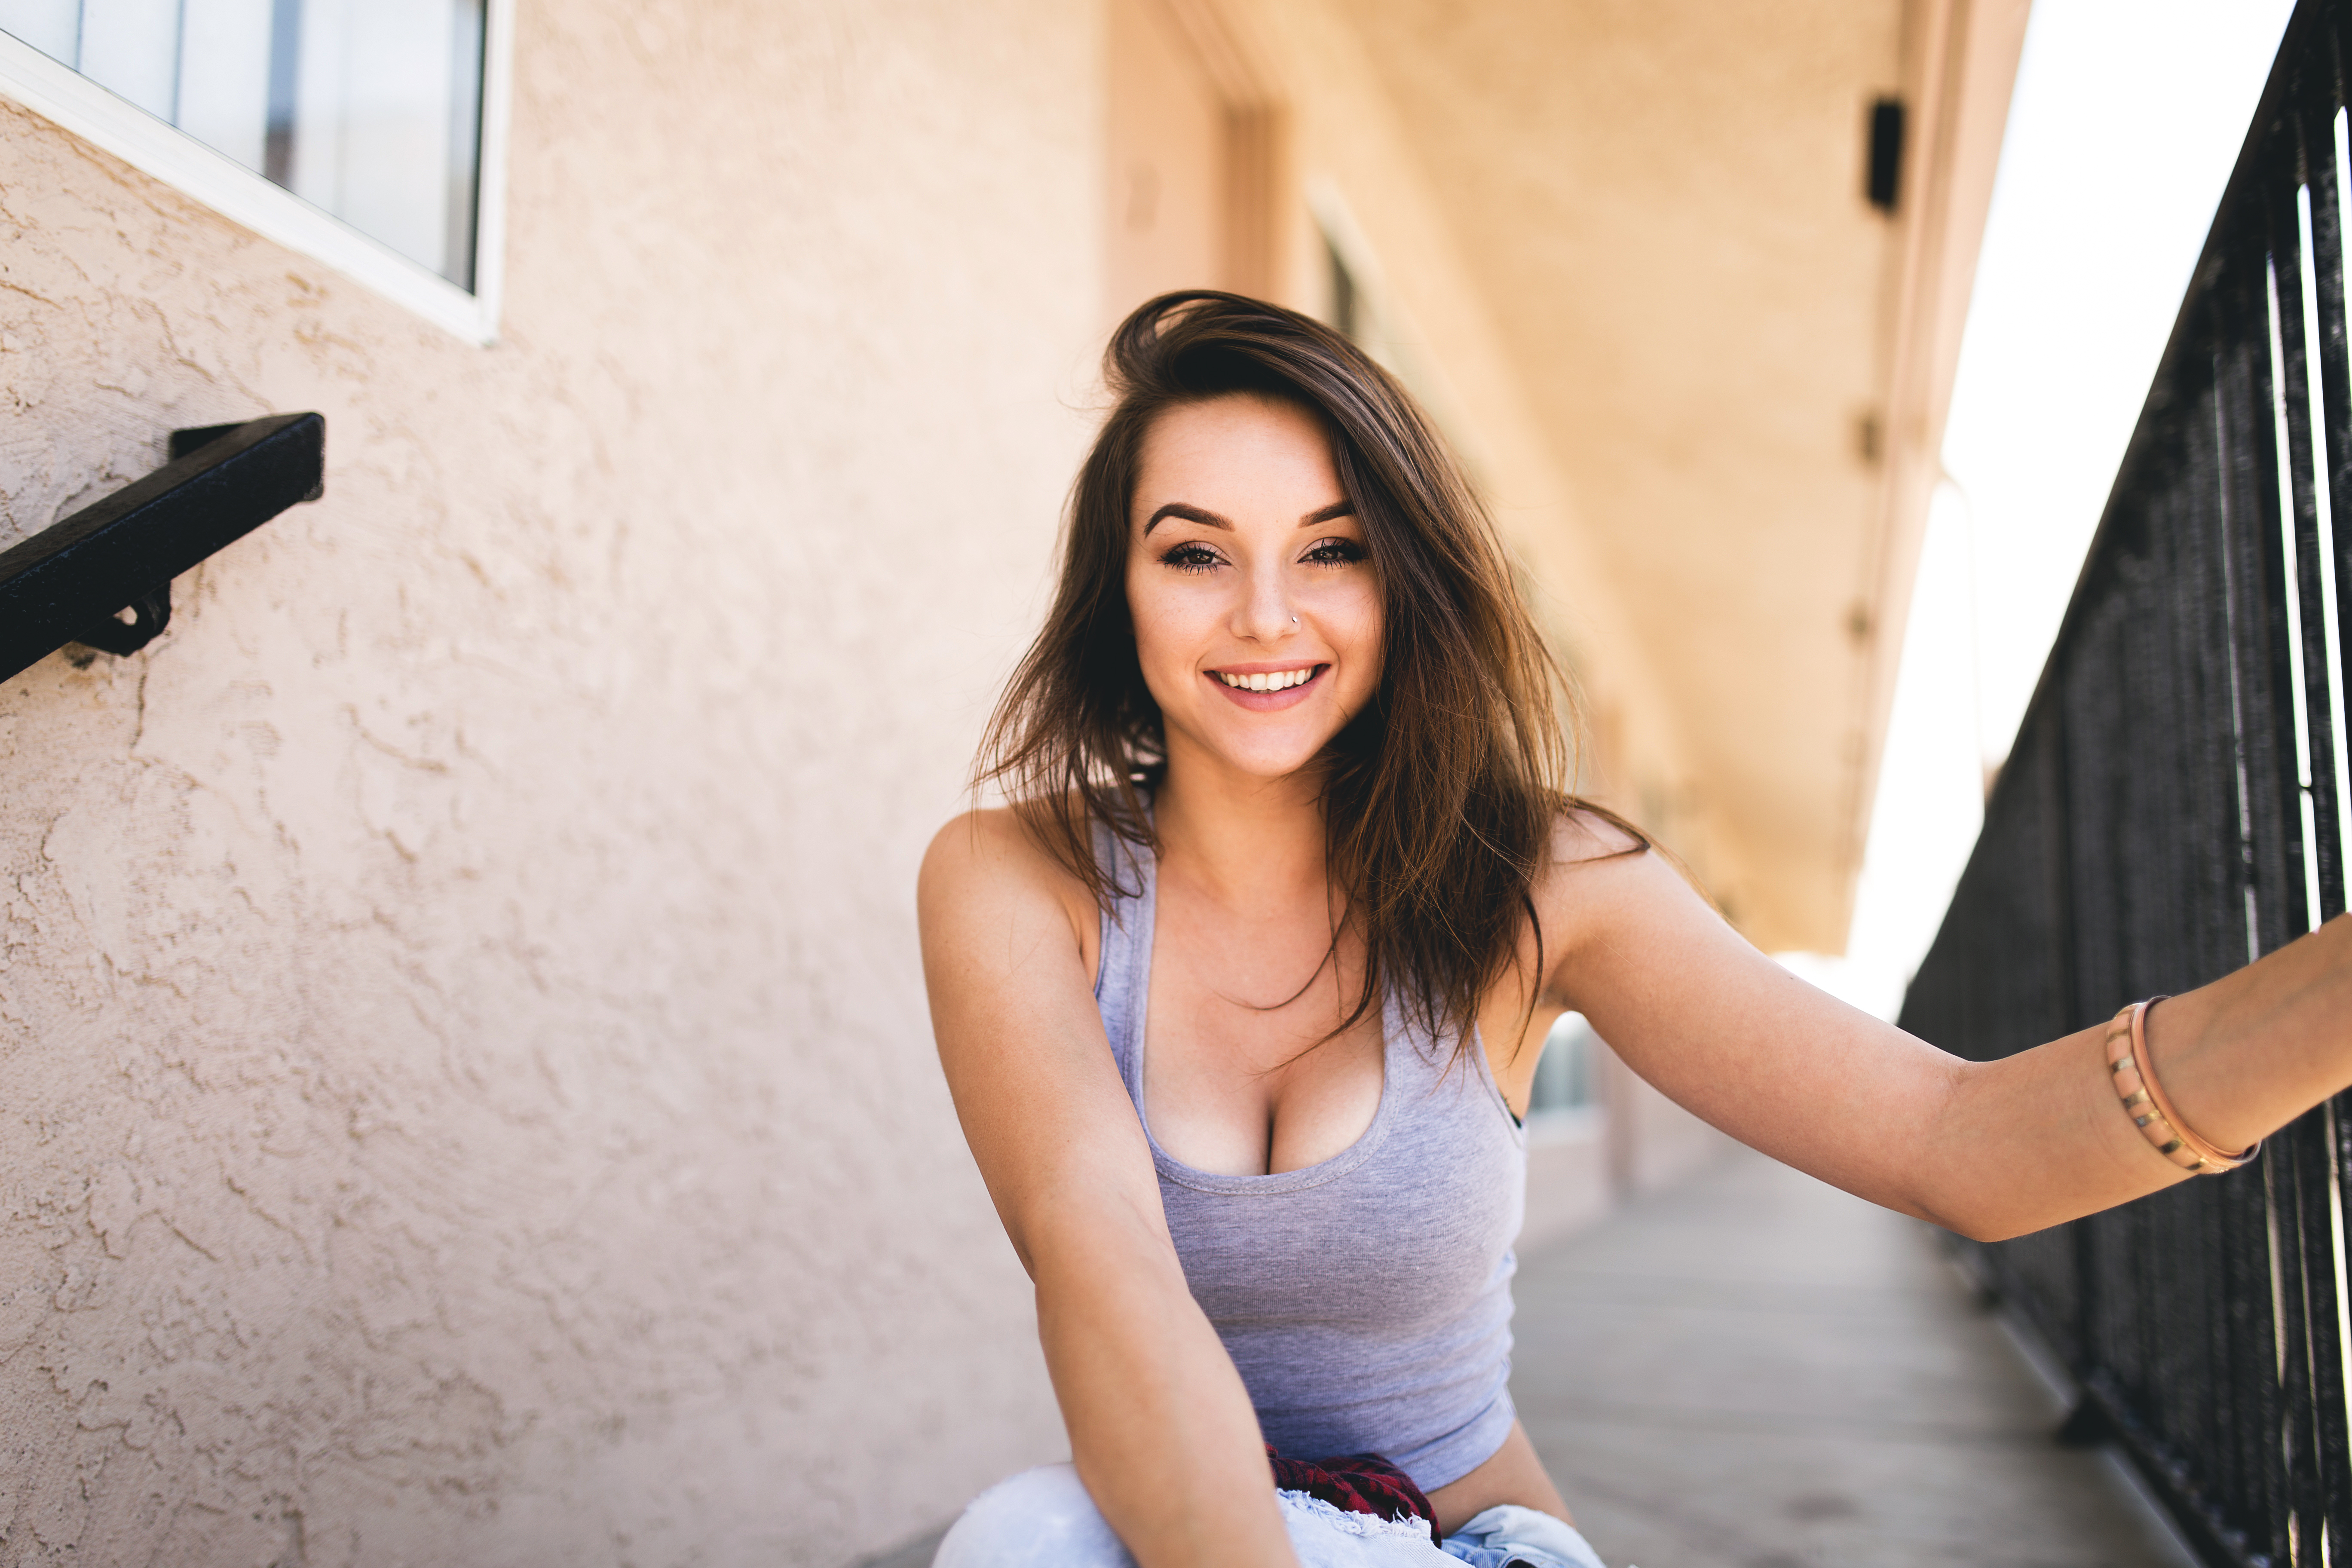 People 5472x3648 women model portrait smiling looking at viewer grey tops sitting outdoors women outdoors depth of field cleavage brunette messy hair happy frontal view